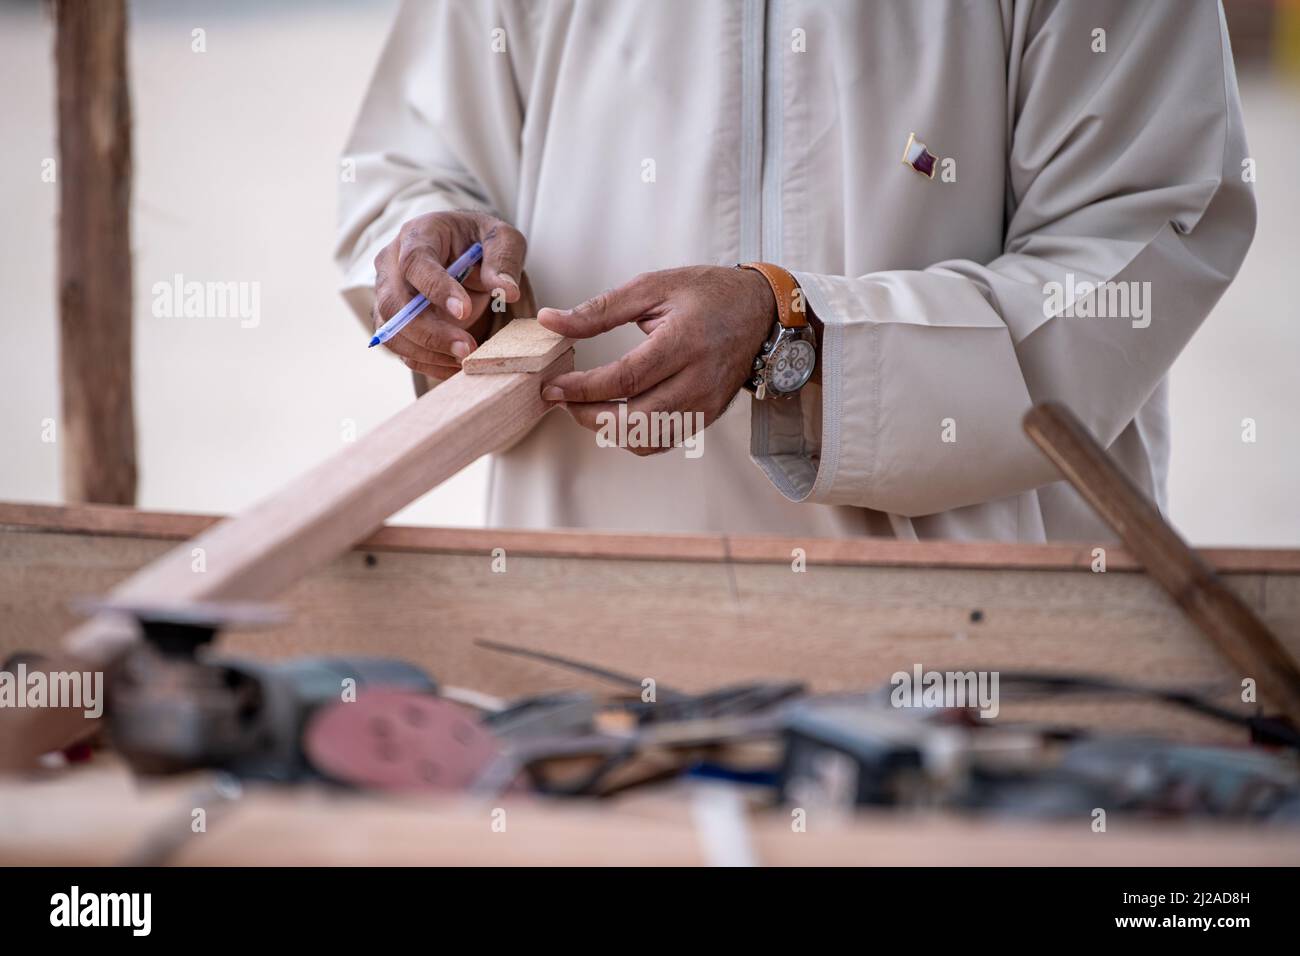 Worker Hands Details Of Wood Cutter Machine With A Circular Saw And Wooden Board Stock Photo